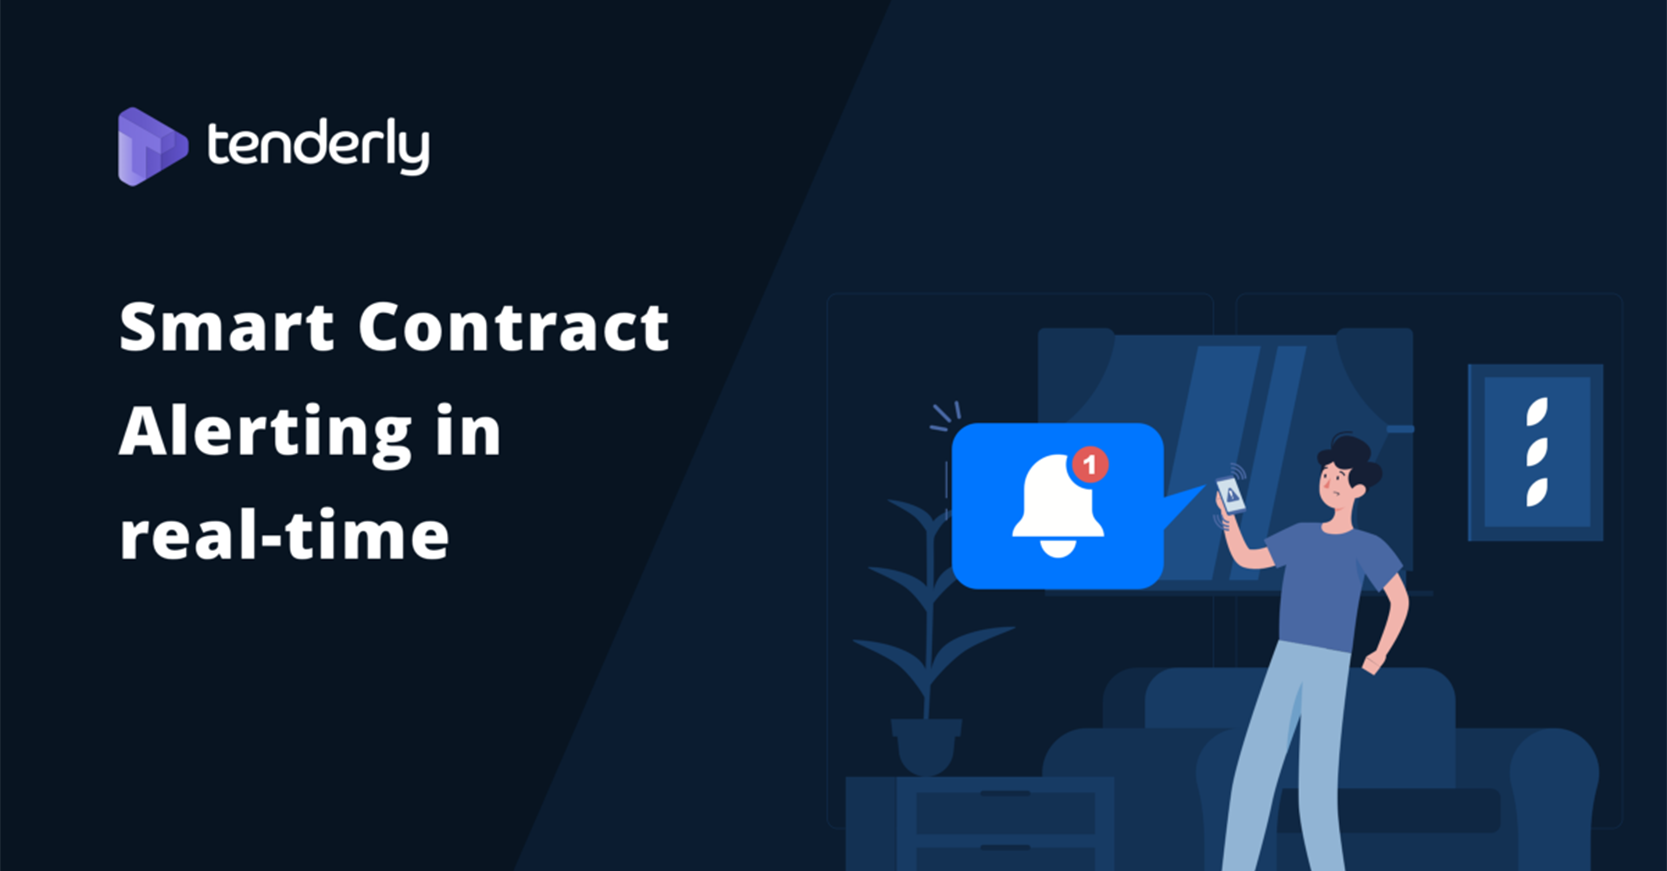 How to Set Up Real-Time Alerting for Smart Contracts With Tenderly